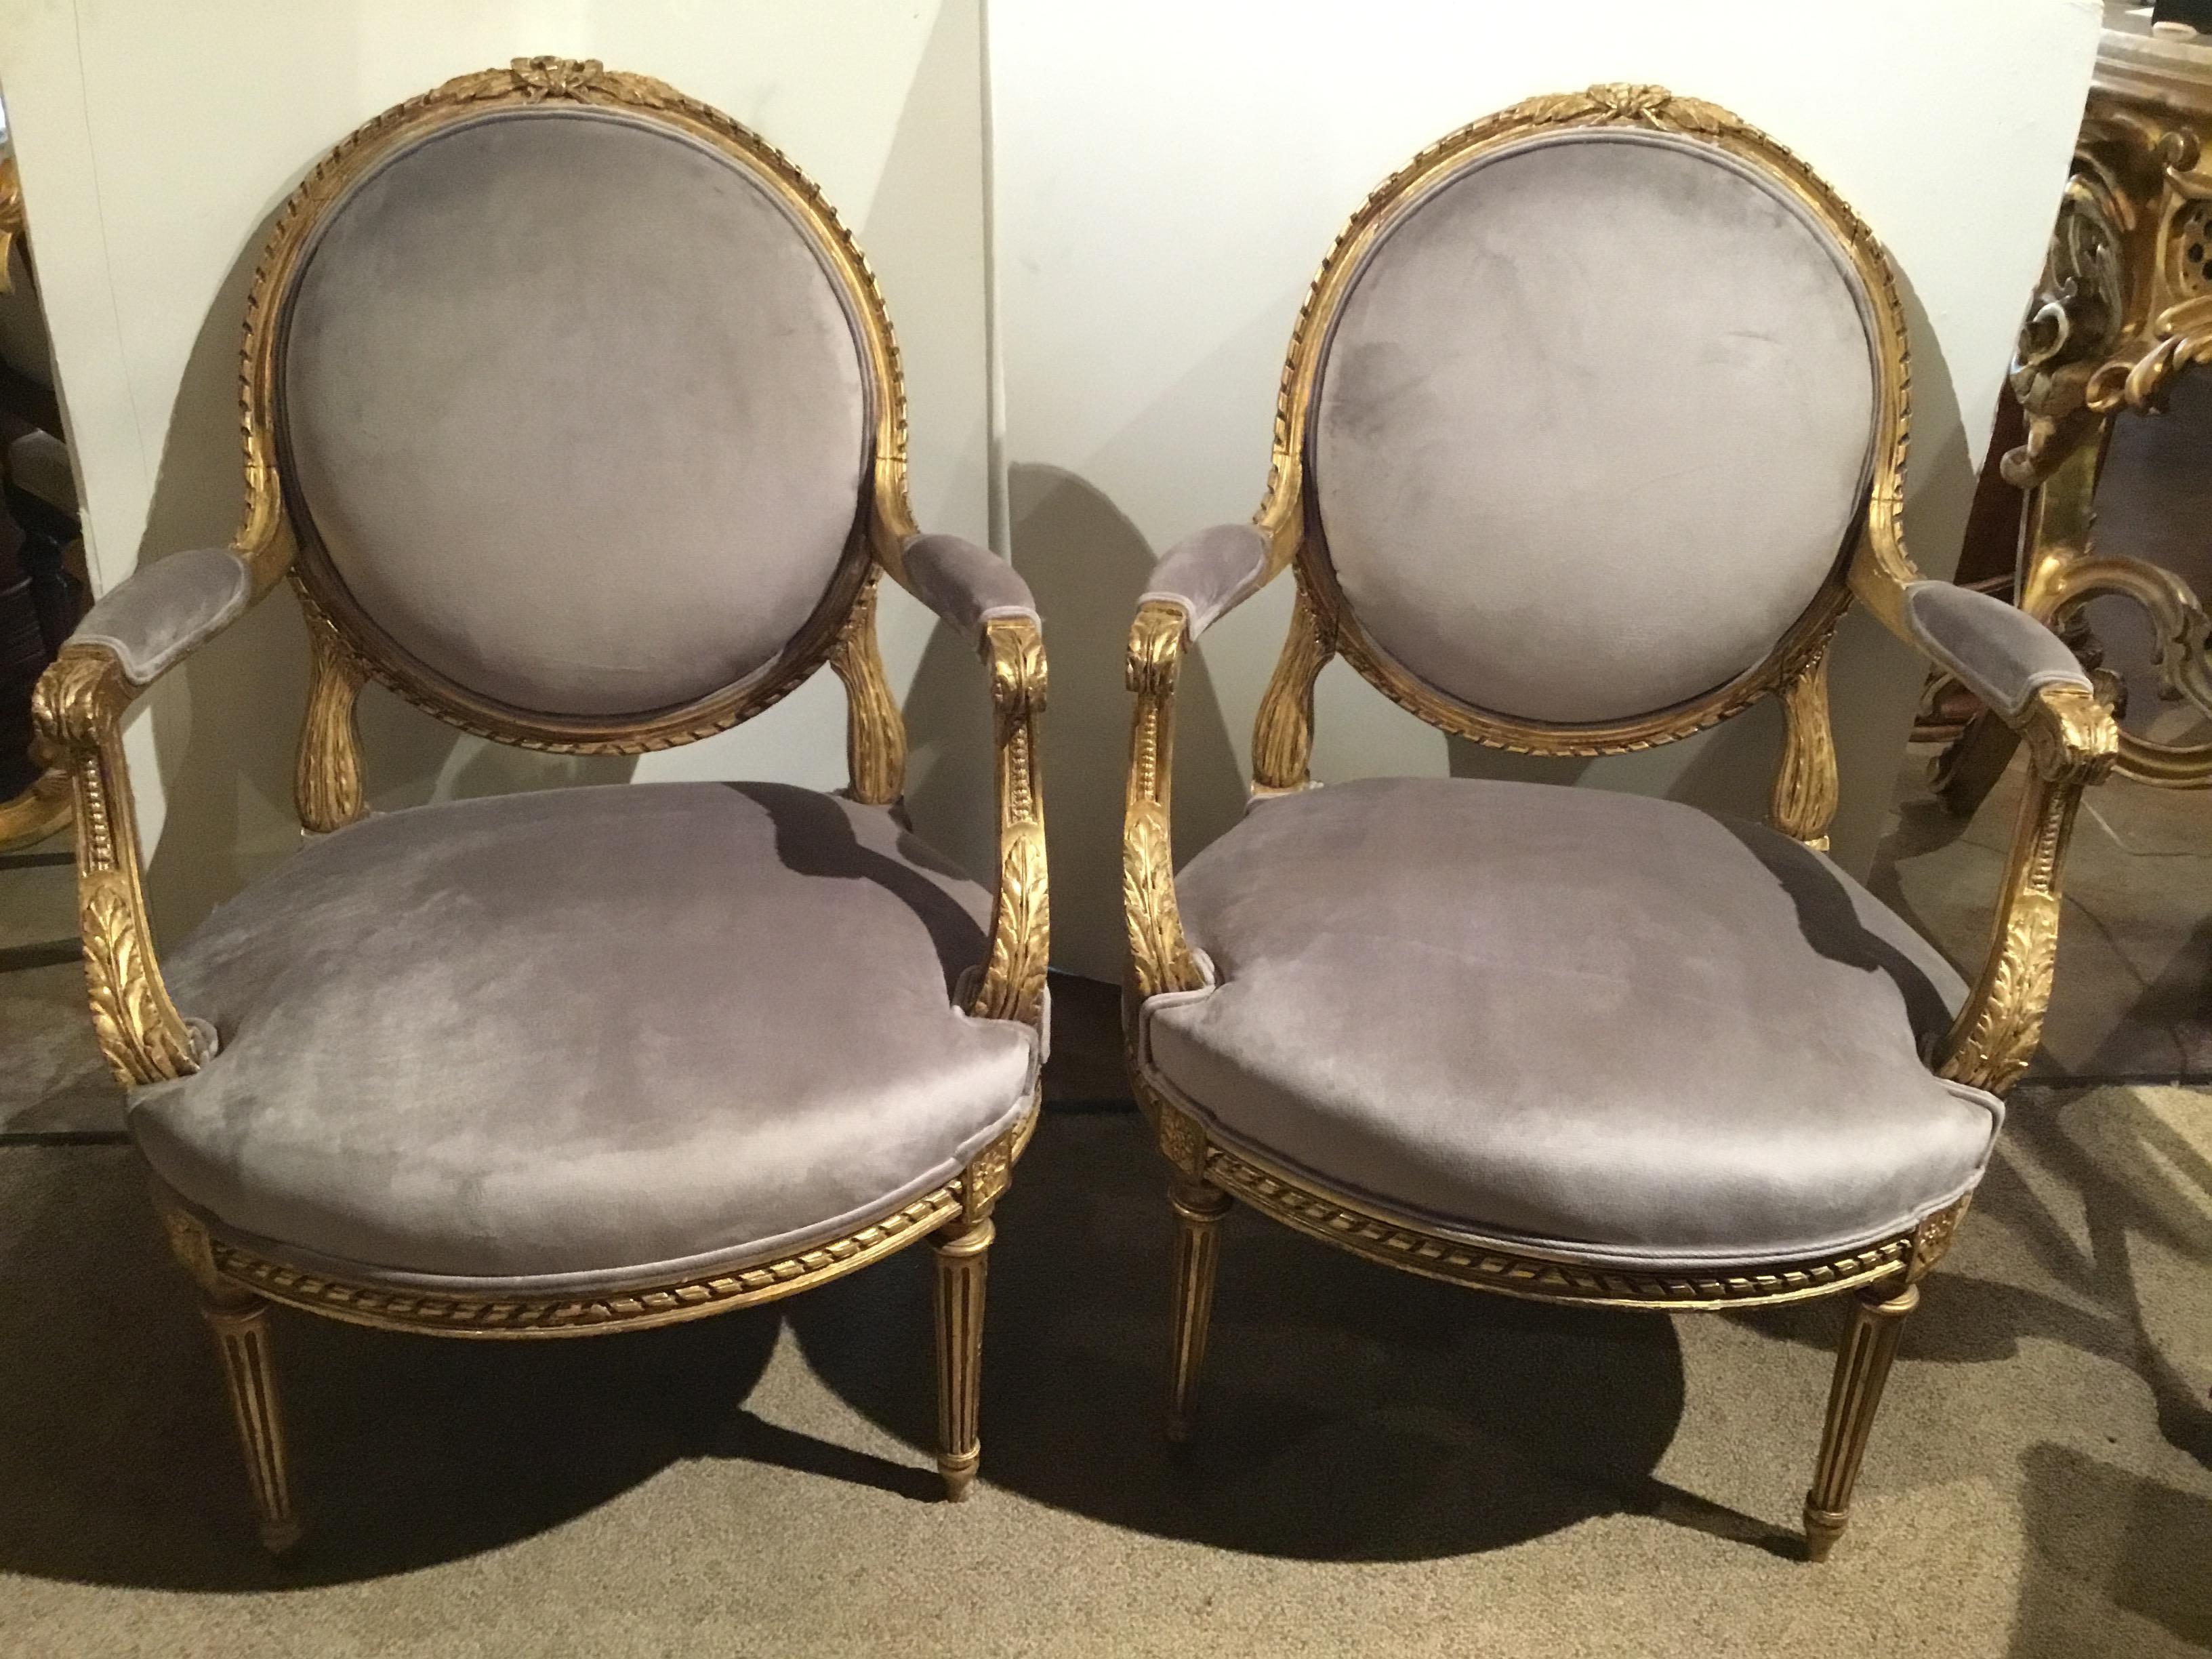 Pair of French Giltwood Louis XVI-Style Chairs with New Upholstery 1